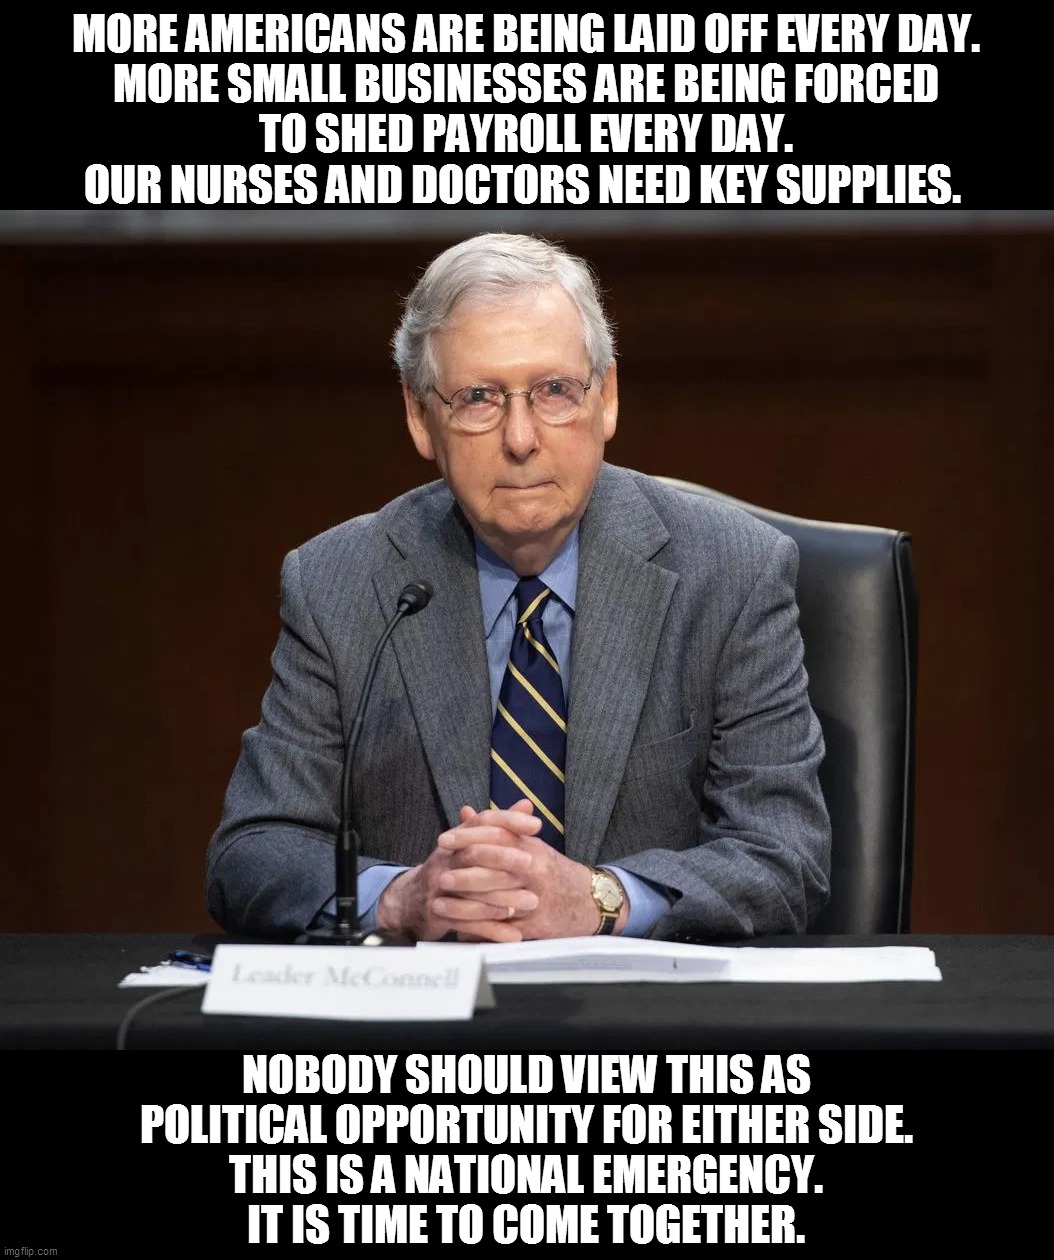 Senate Majority Leader McConnell | MORE AMERICANS ARE BEING LAID OFF EVERY DAY.
MORE SMALL BUSINESSES ARE BEING FORCED
TO SHED PAYROLL EVERY DAY.
OUR NURSES AND DOCTORS NEED KEY SUPPLIES. NOBODY SHOULD VIEW THIS AS
POLITICAL OPPORTUNITY FOR EITHER SIDE.
THIS IS A NATIONAL EMERGENCY.
IT IS TIME TO COME TOGETHER. | image tagged in memes,coronavirus,epidemic,mitch mcconnell,national emergency,ConservativeMemes | made w/ Imgflip meme maker